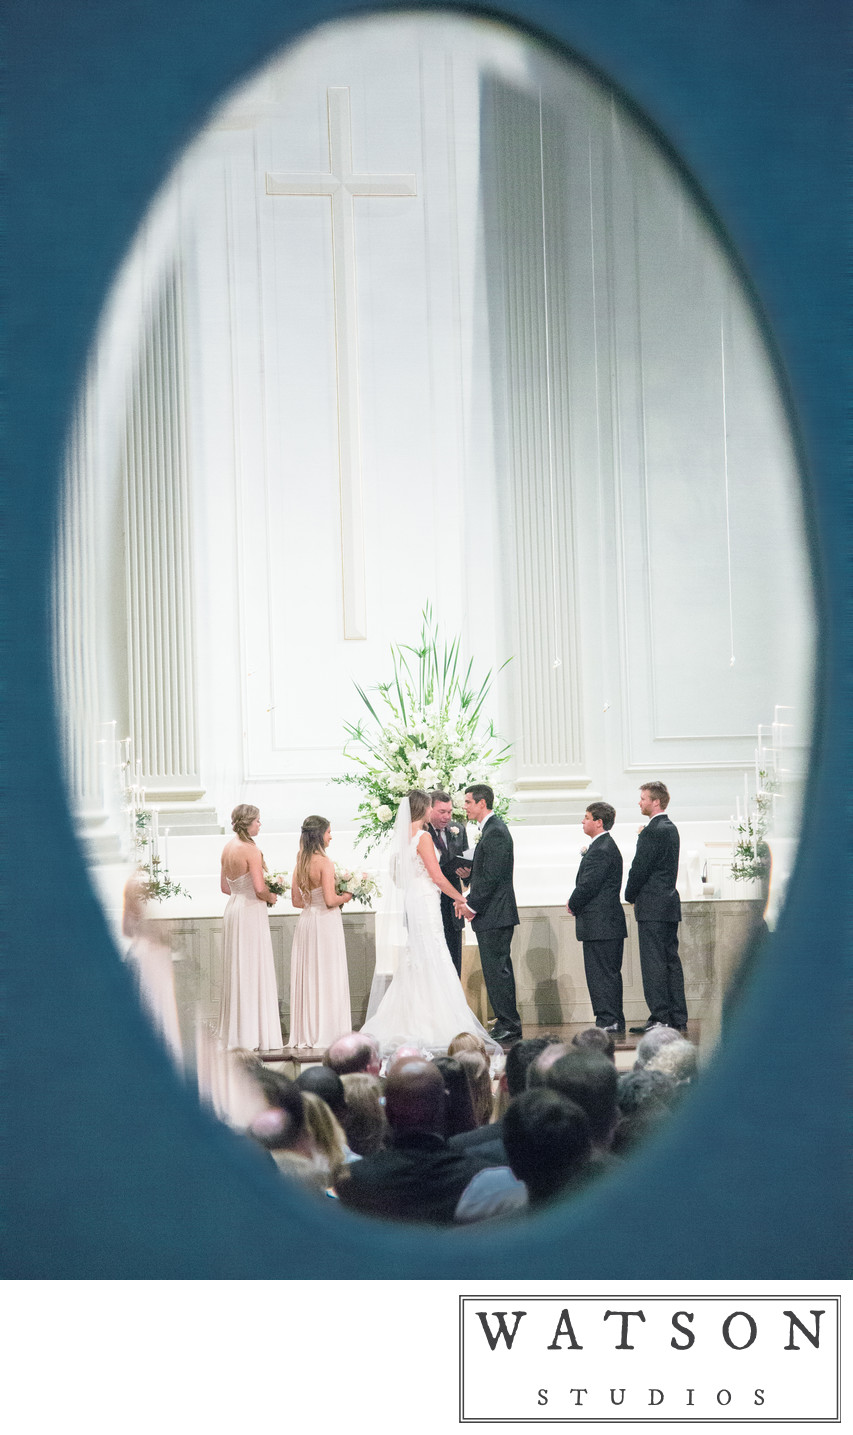 Wedding Venues in Chattanooga